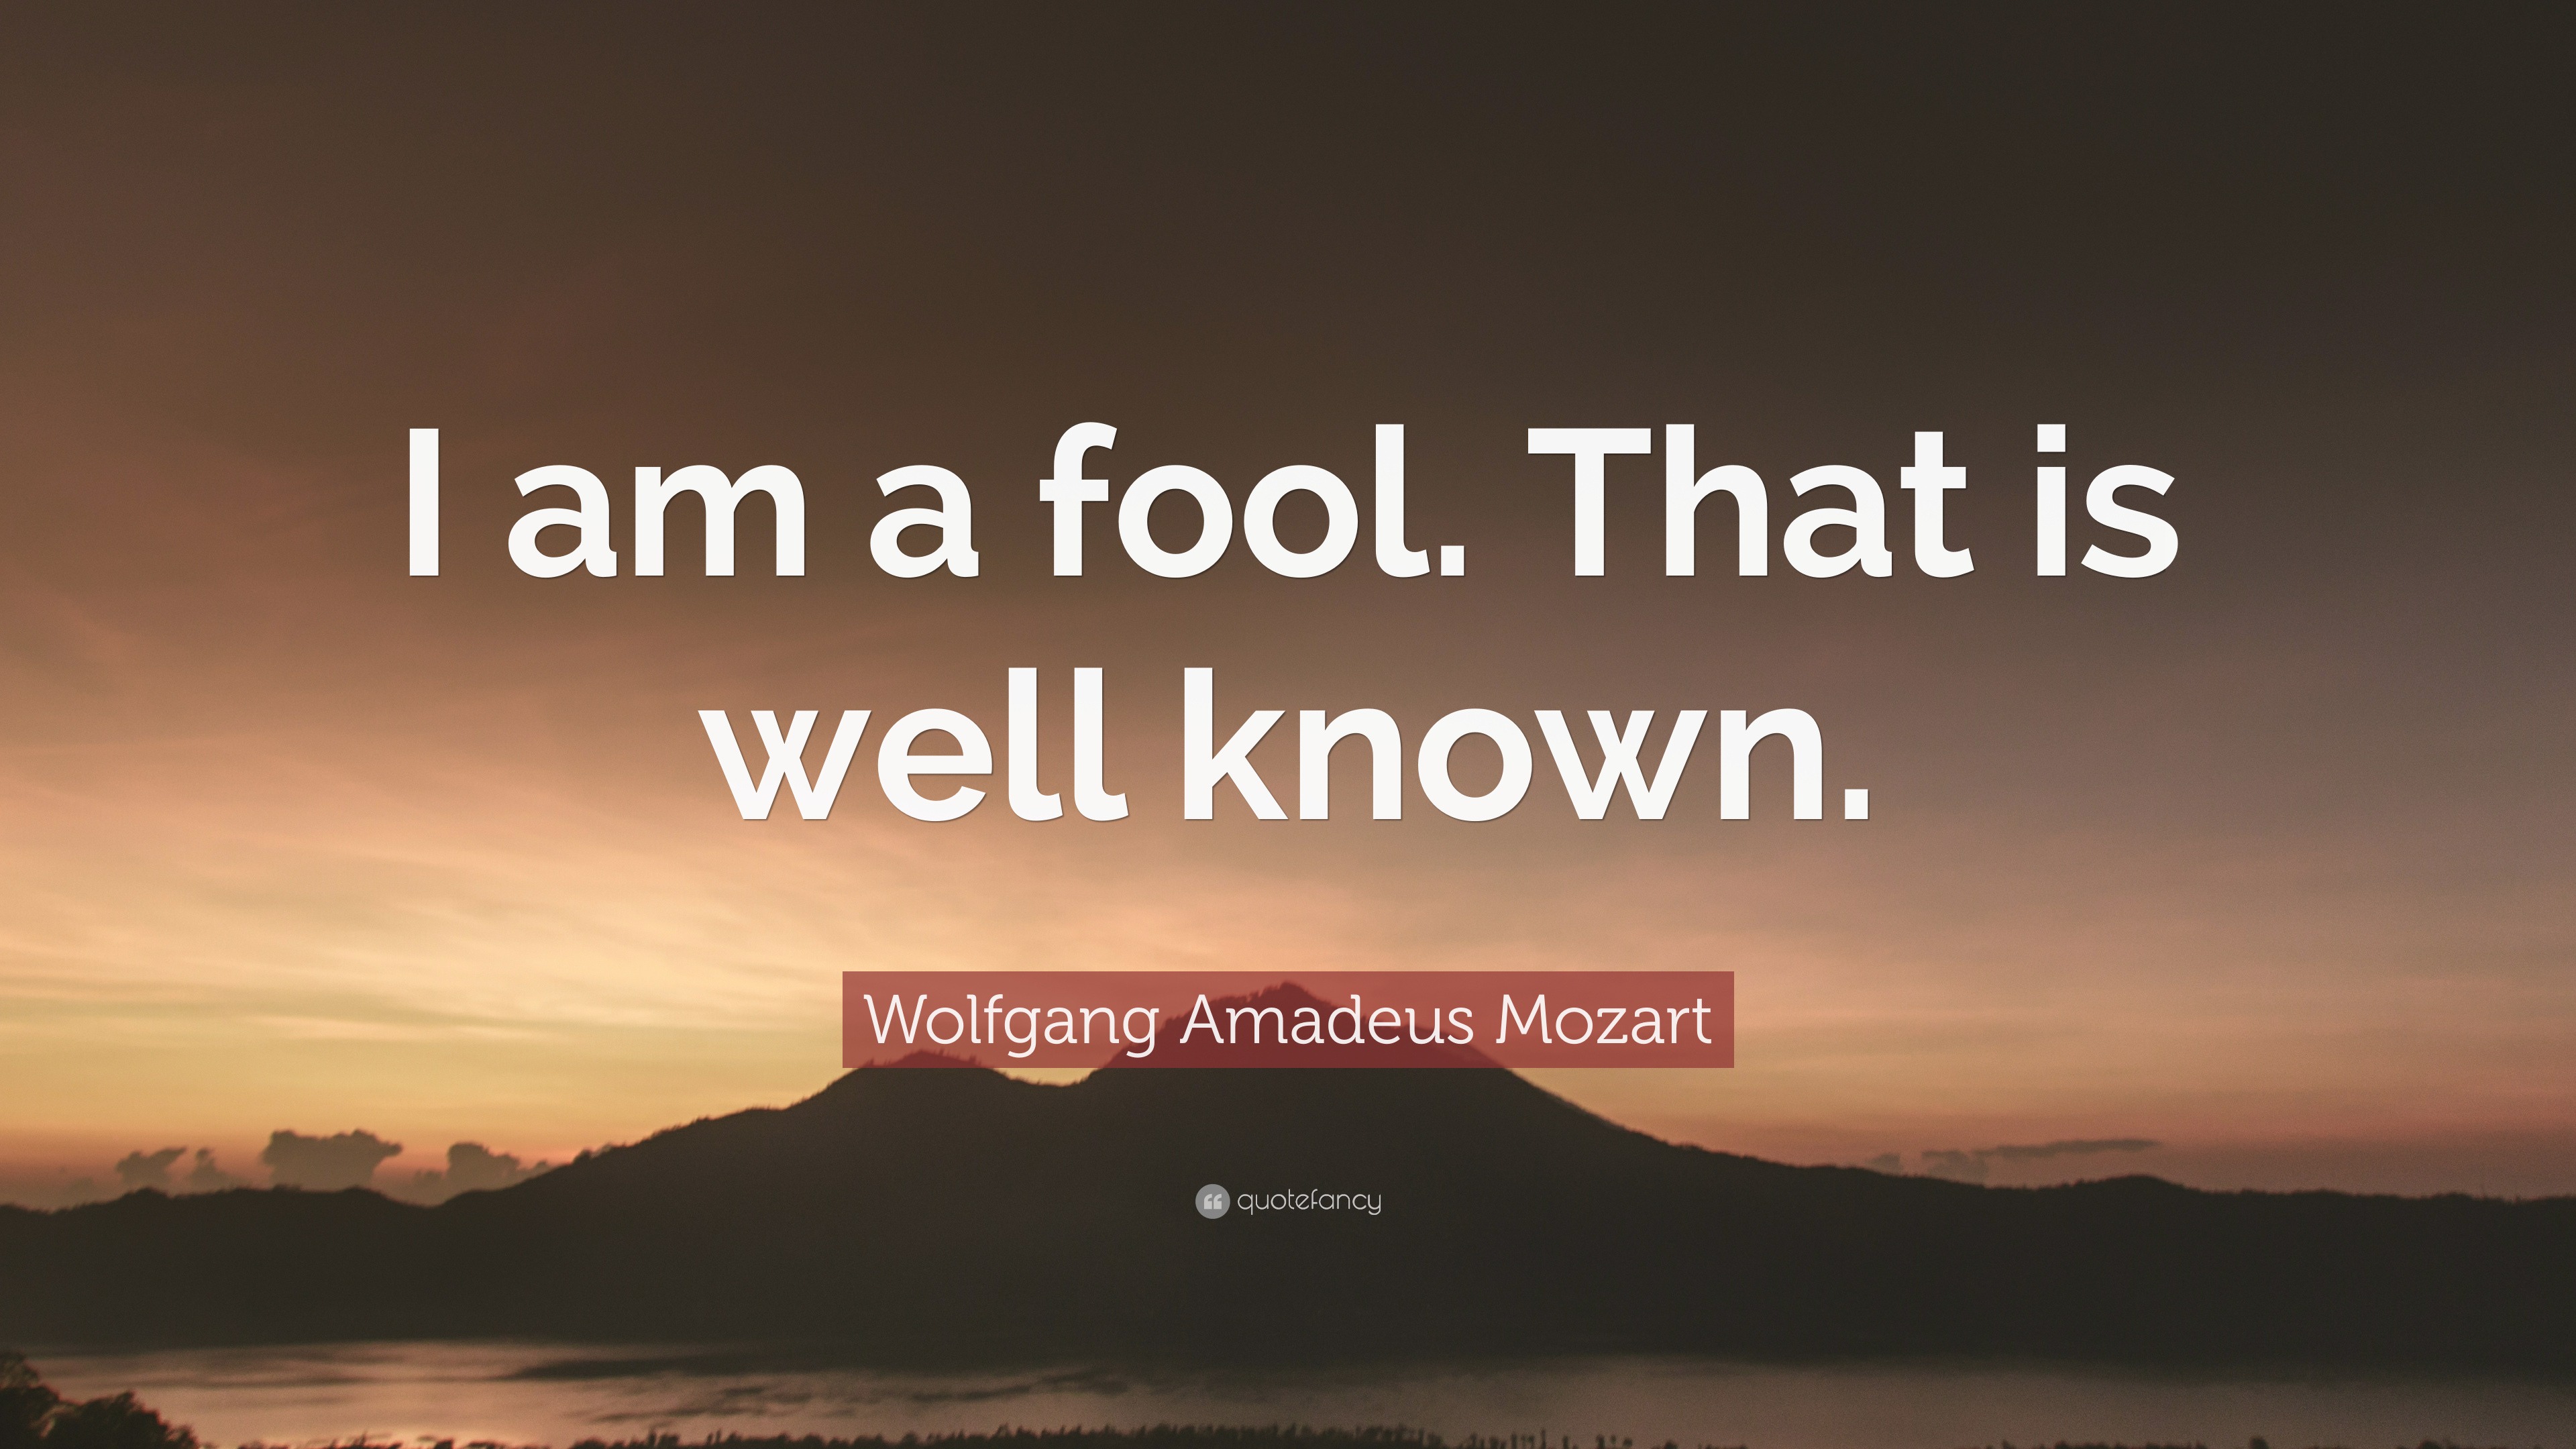 Wolfgang Amadeus Mozart Quote: “I am a fool. That is well known.”